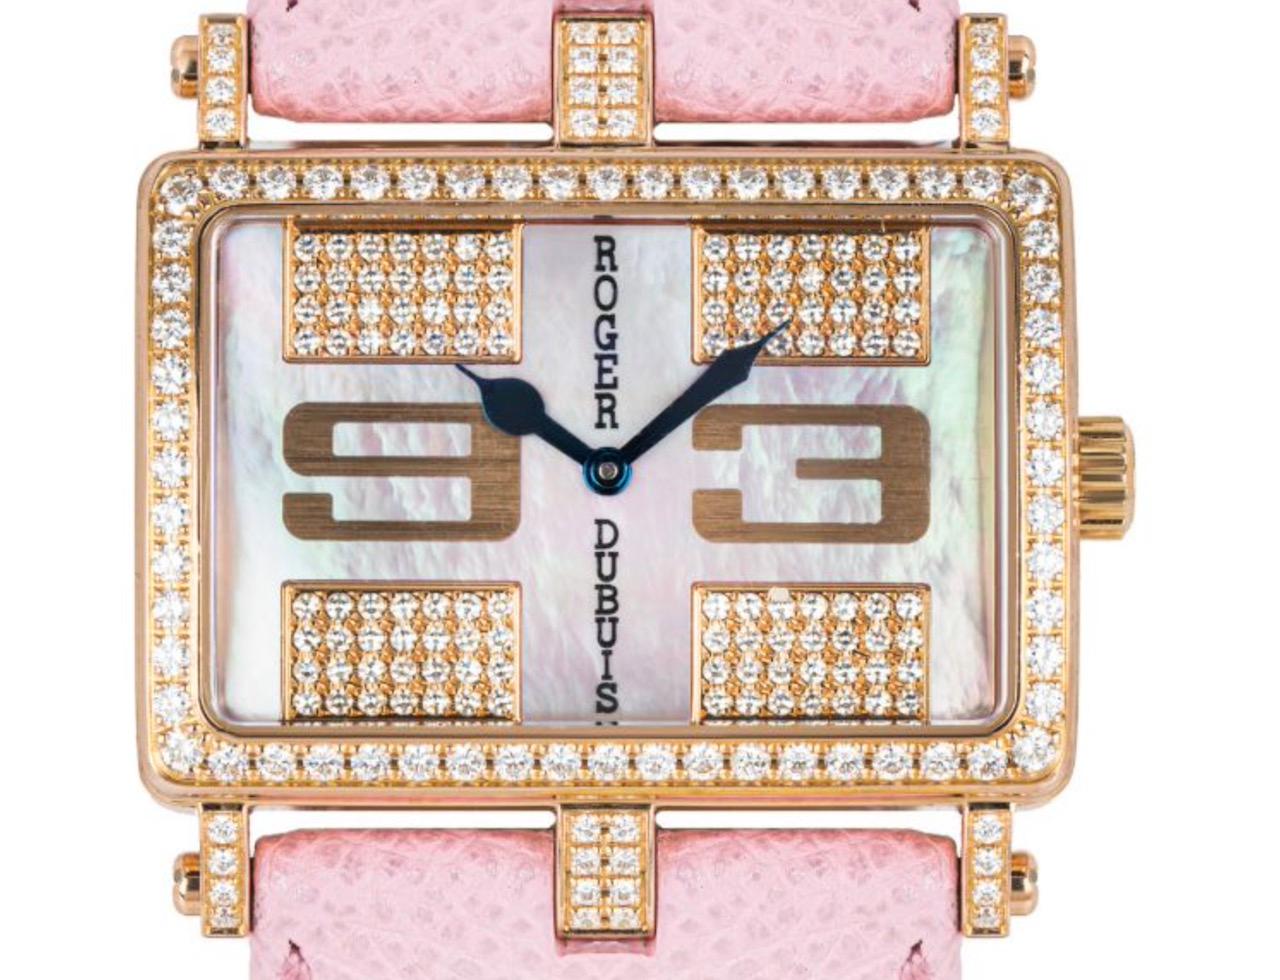 A dazzling Ladies 37mm Roger Dubuis Too Much wristwatch crafted in rose gold. Features a stunning mother of pearl dial with a pave set, arabic numbers 3,9 and blueed steel sword shape hands. Complimenting the dial is a rose gold bezel set with 60